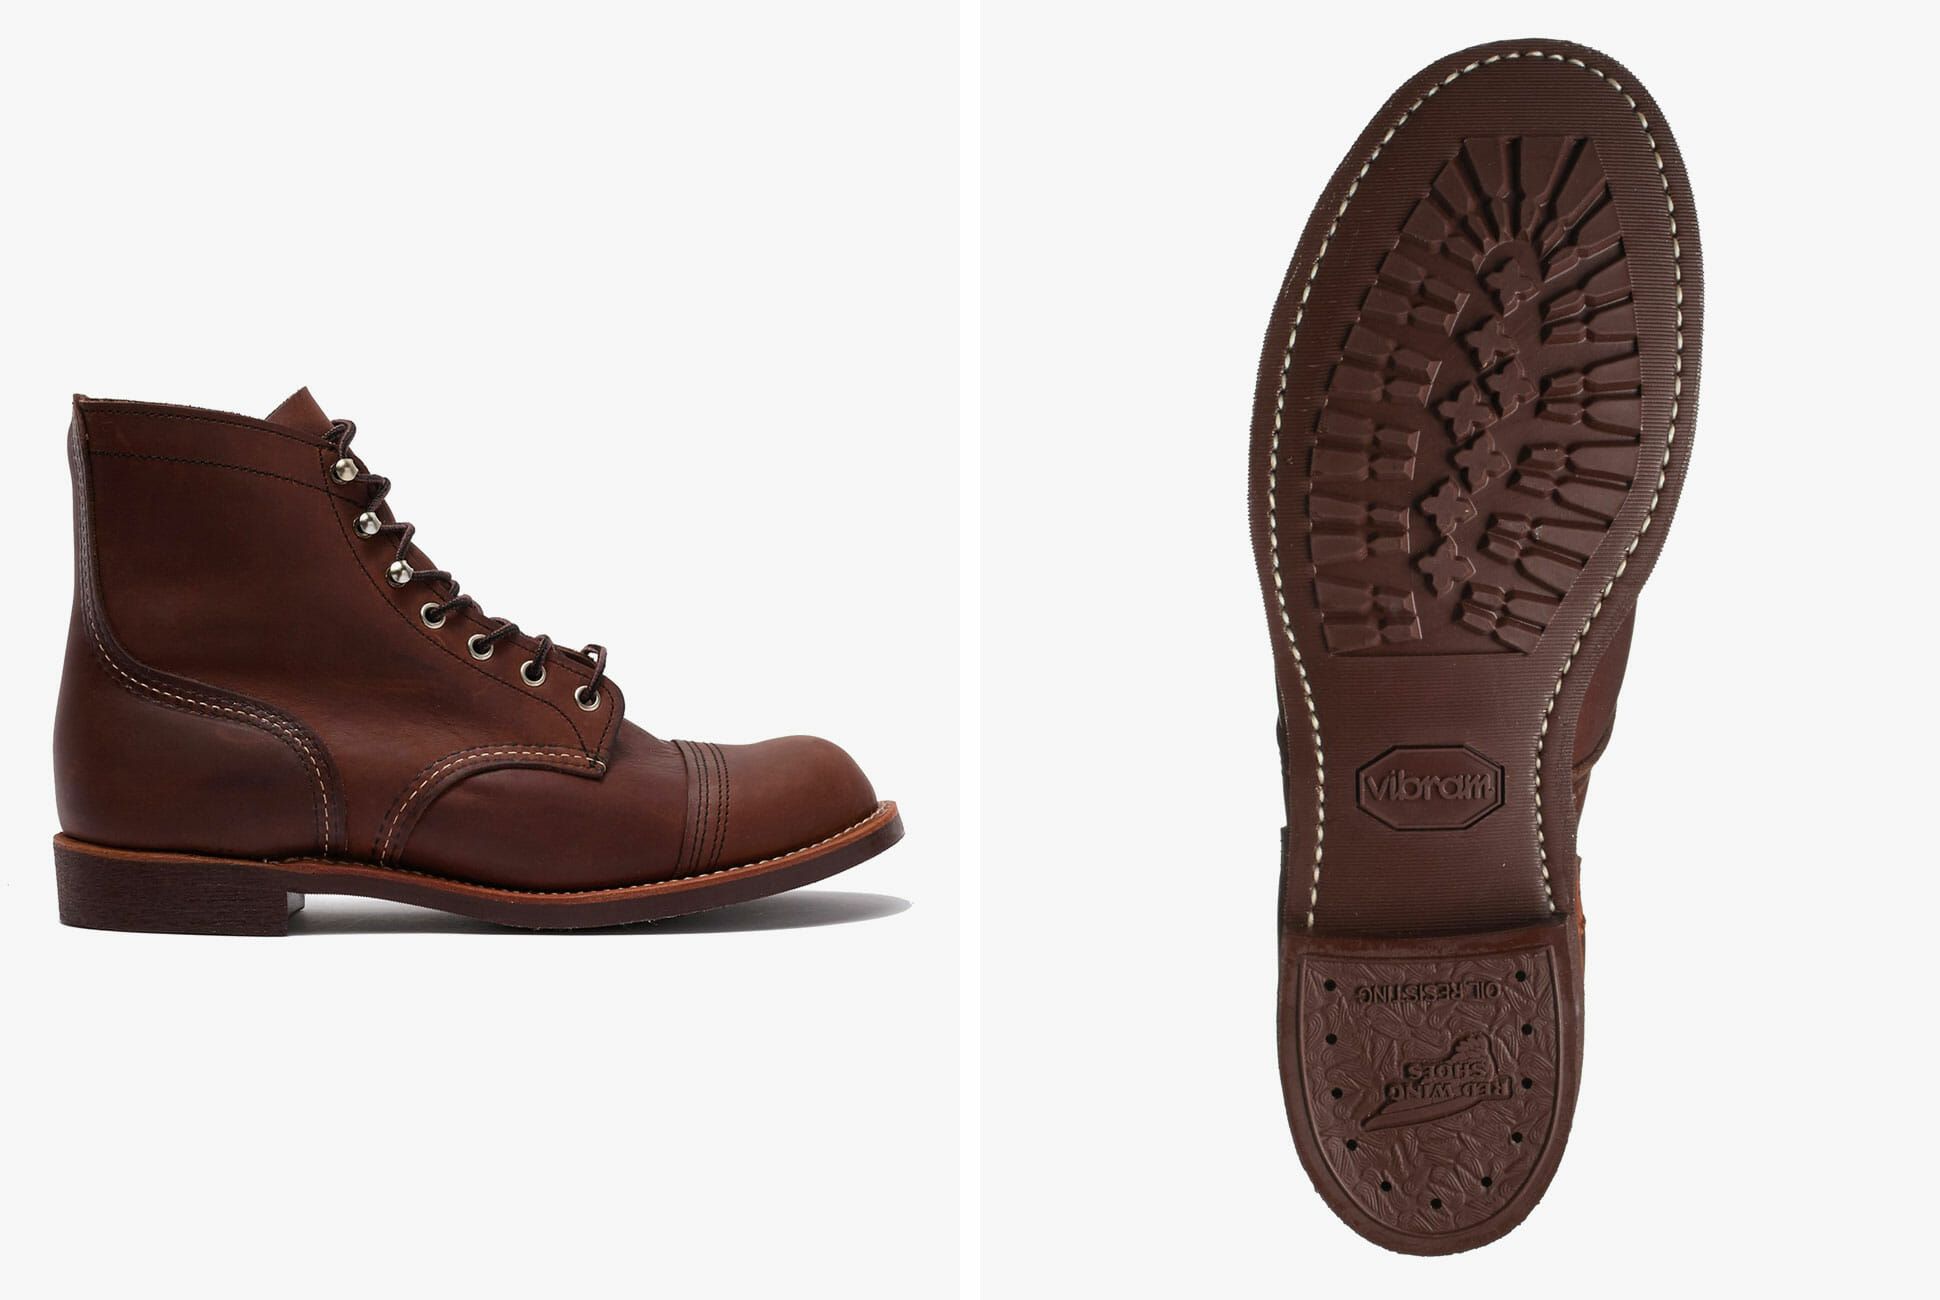 These $330 Red Wing Heritage Iron 